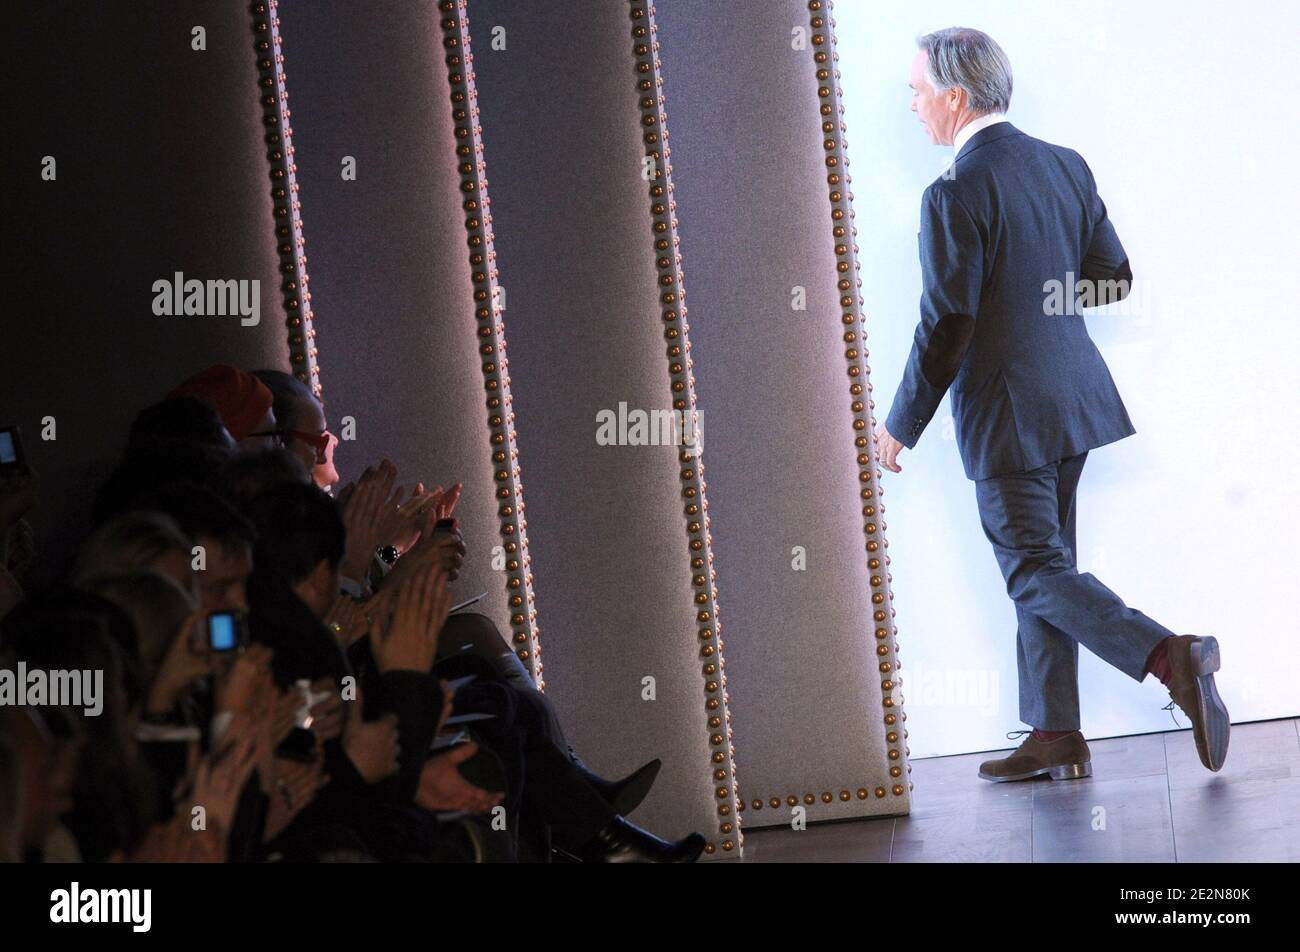 Designer Tommy Hilfiger walks the runway at the end of his fashion show  during the Mercedes-Benz Fashion Week Fall 2010 in New York City, NY, USA  on February 18, 2010. Photo by